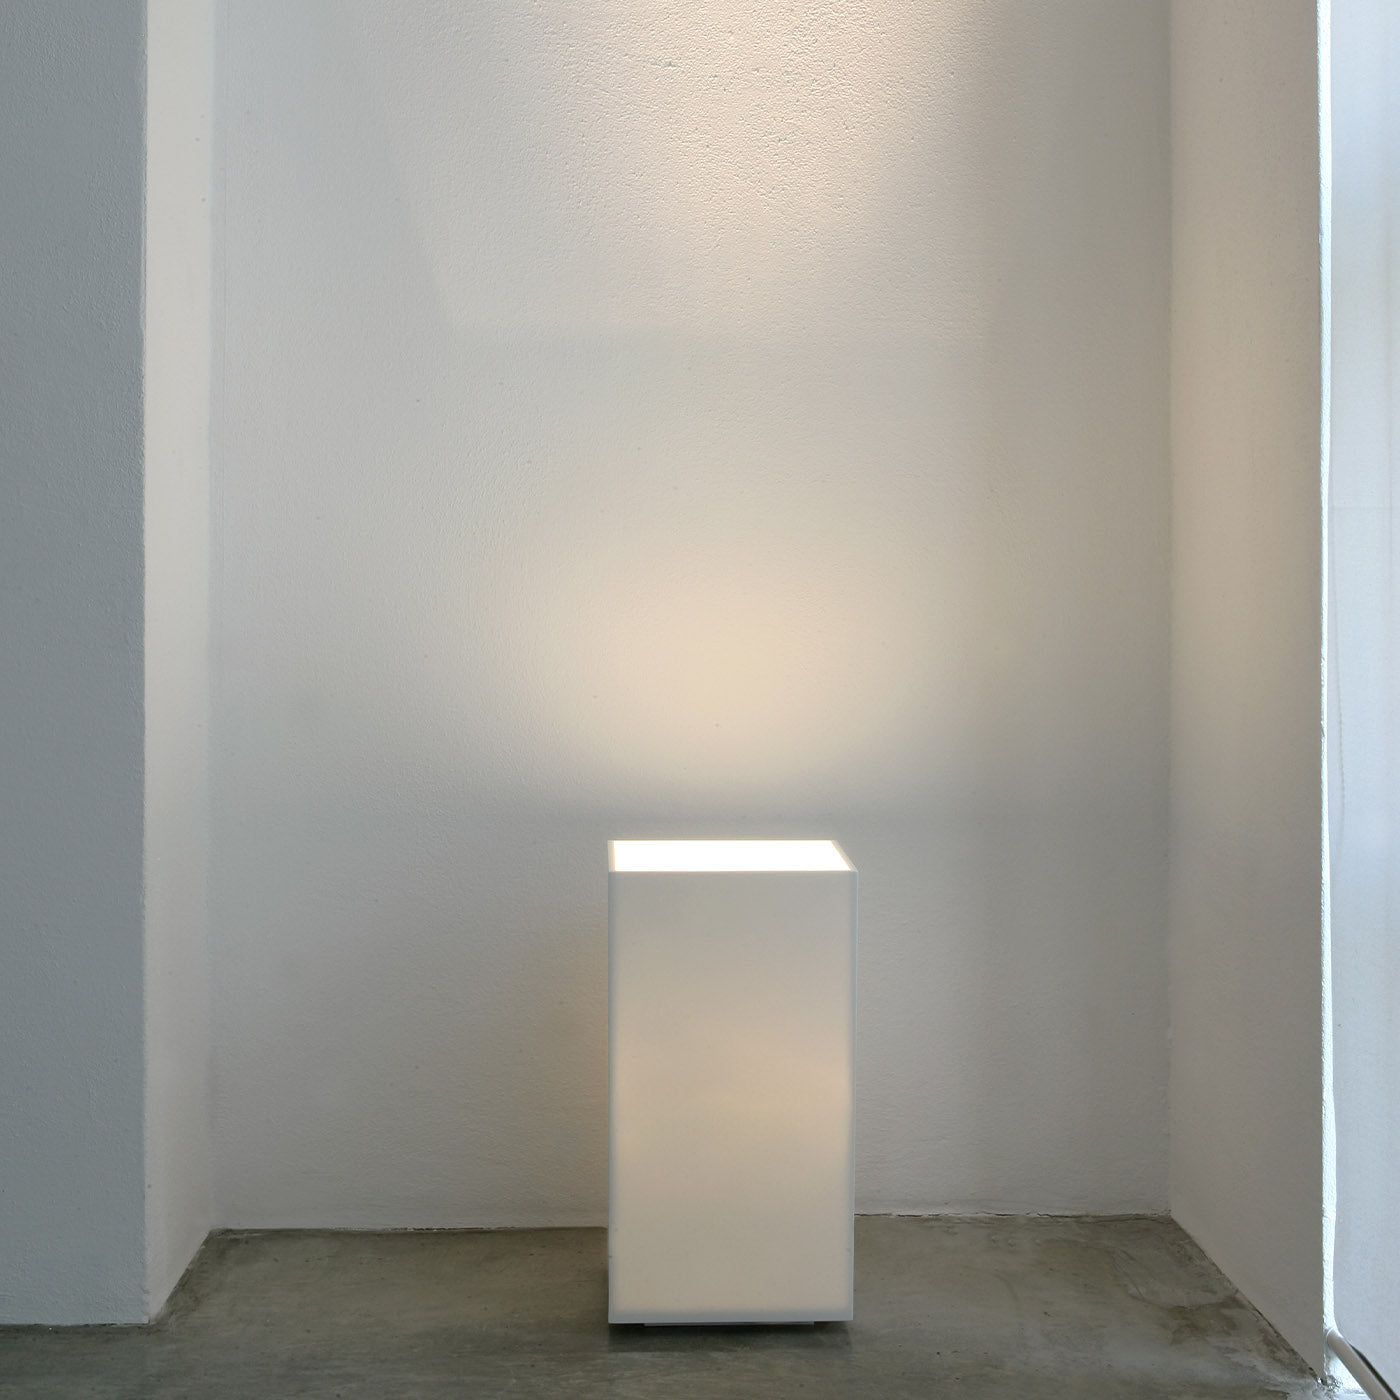 Light Gallery Luxury Cubo 400 White Floor Lamp by Marco Pollice - Alternative view 2